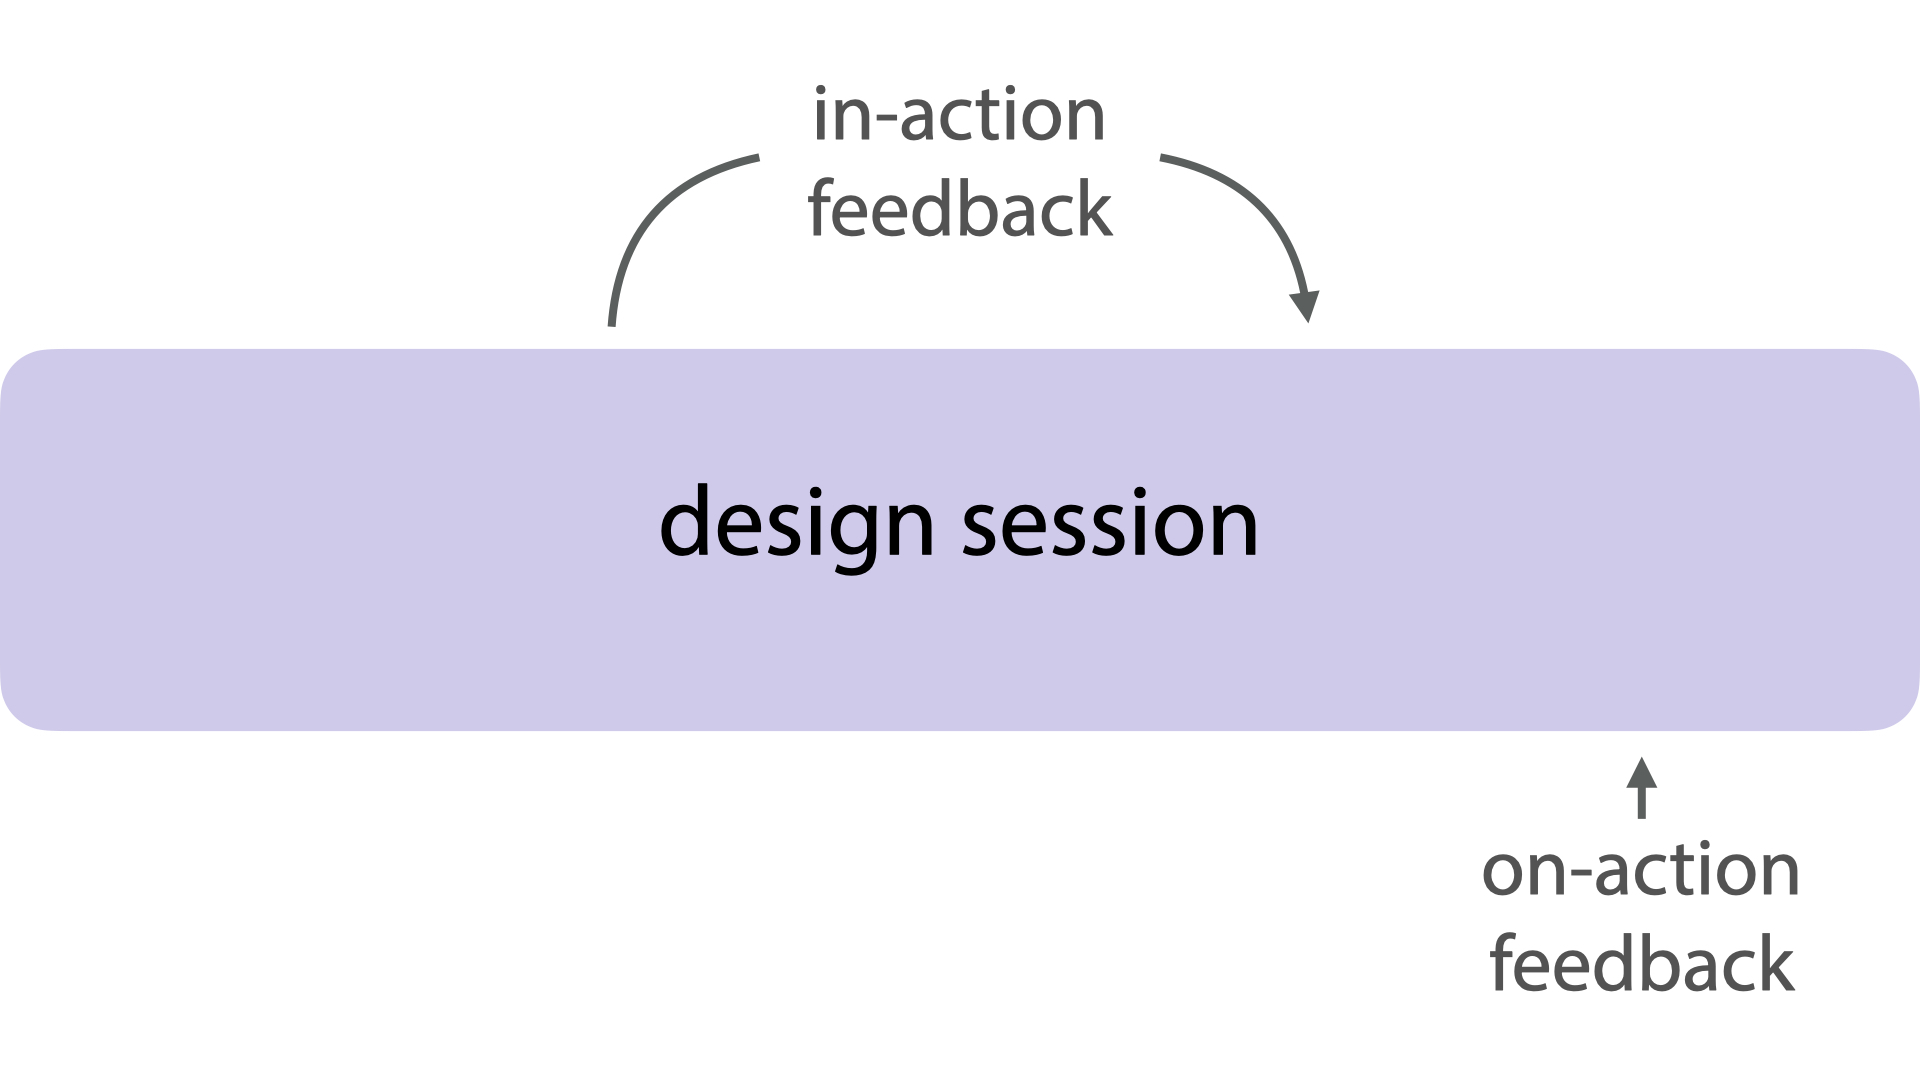 When to Give Feedback: Exploring Tradeoffs in the Timing of Design Feedback